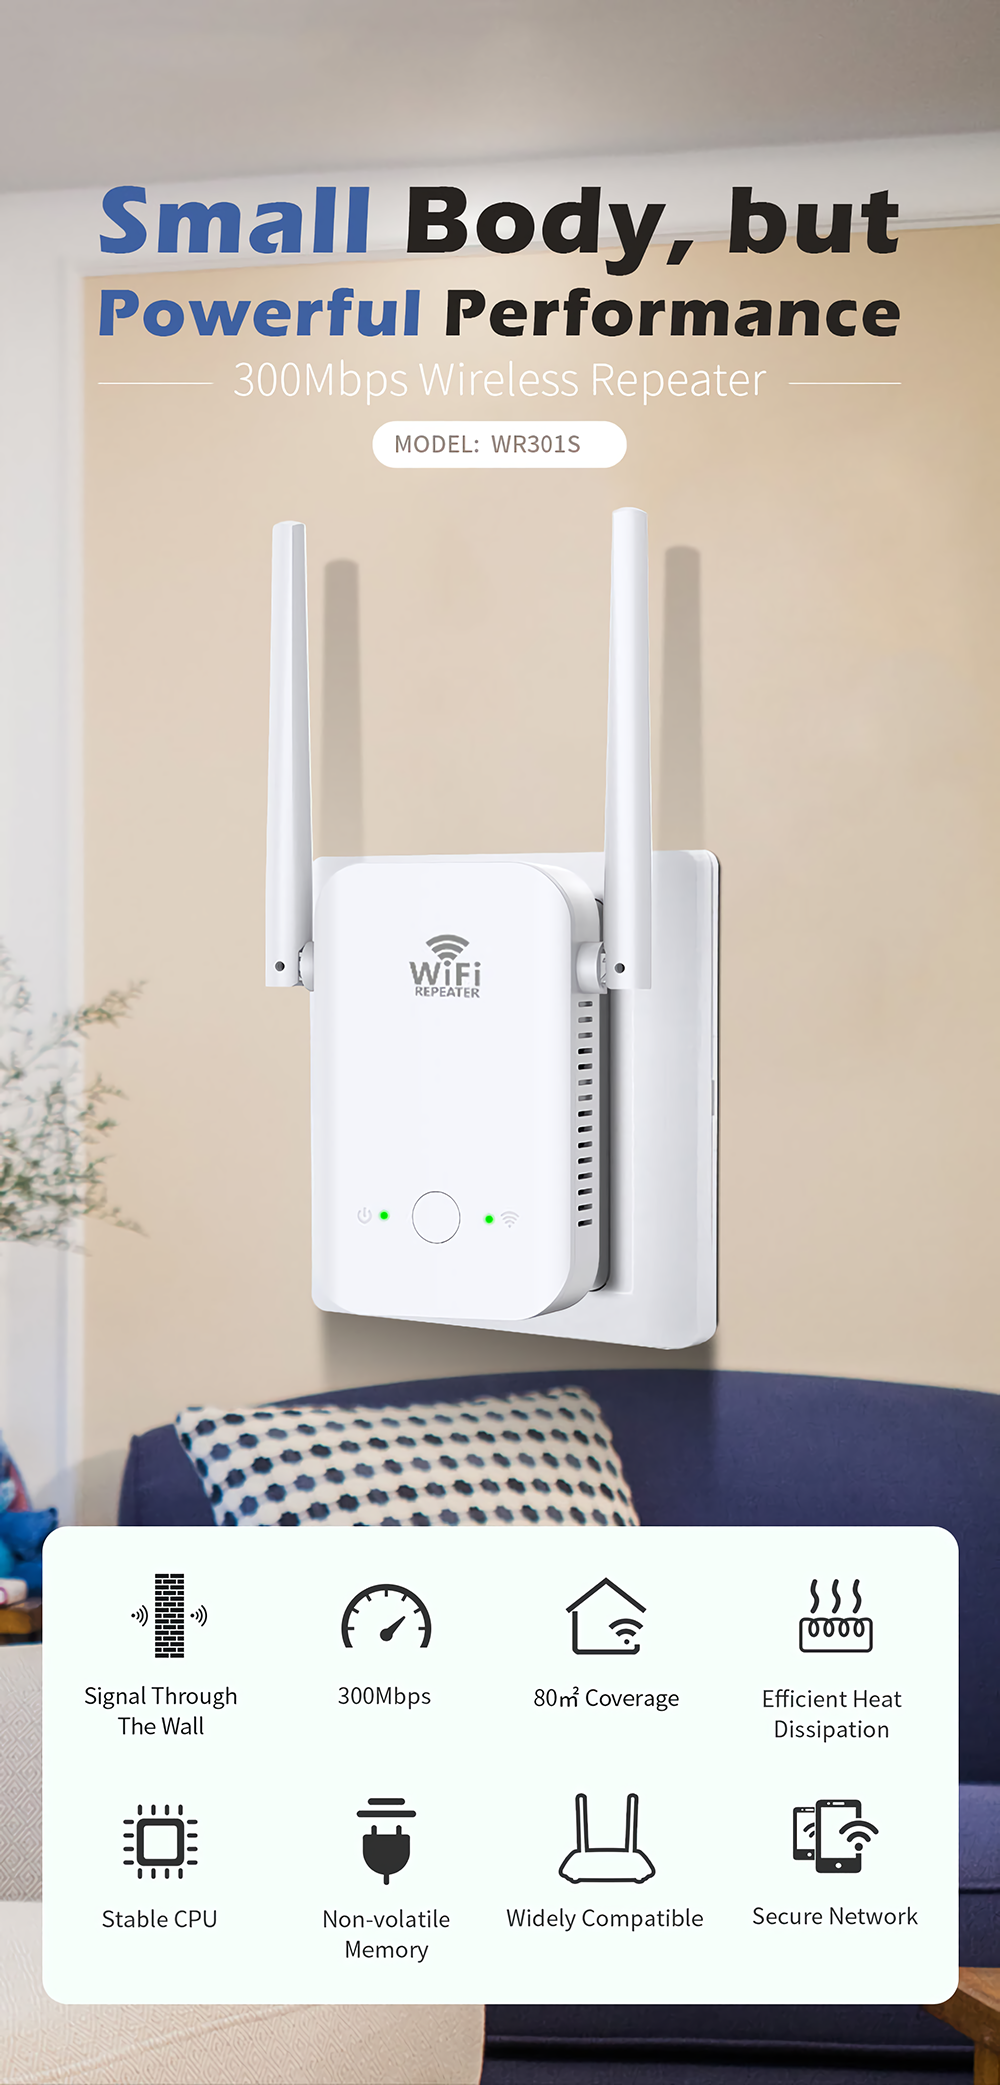 300Mbps-Wireless-Repeater-Wifi-Range-Extender-23dBi-Amplifier-24GHz-WiFi-Signal-Booster-WR301S-1811914-1